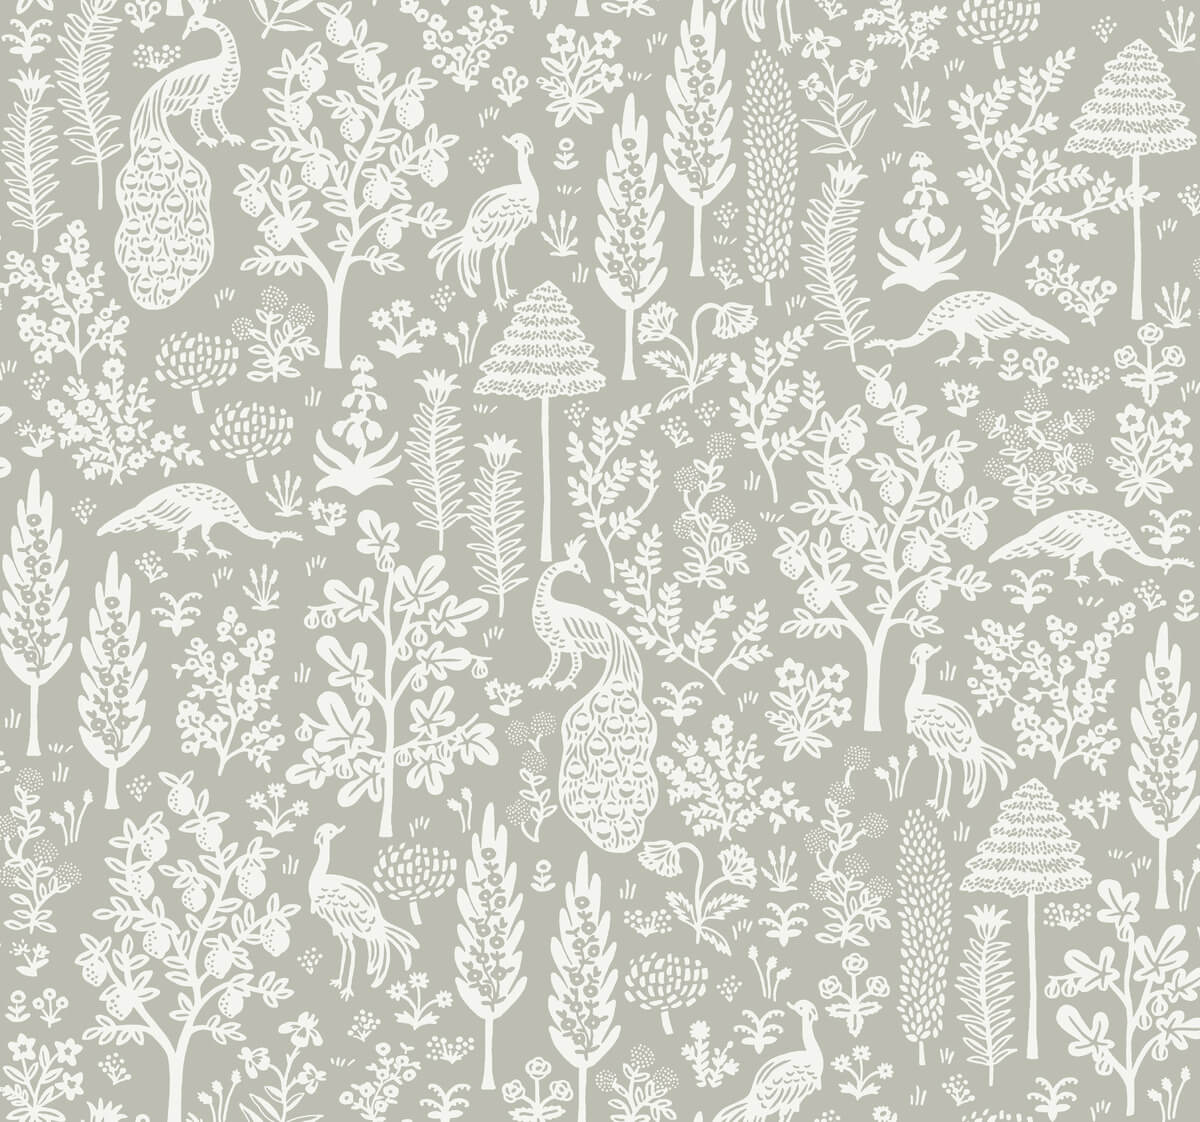 Rifle Paper Co. Second Edition Menagerie Toile Wallpaper - Gray